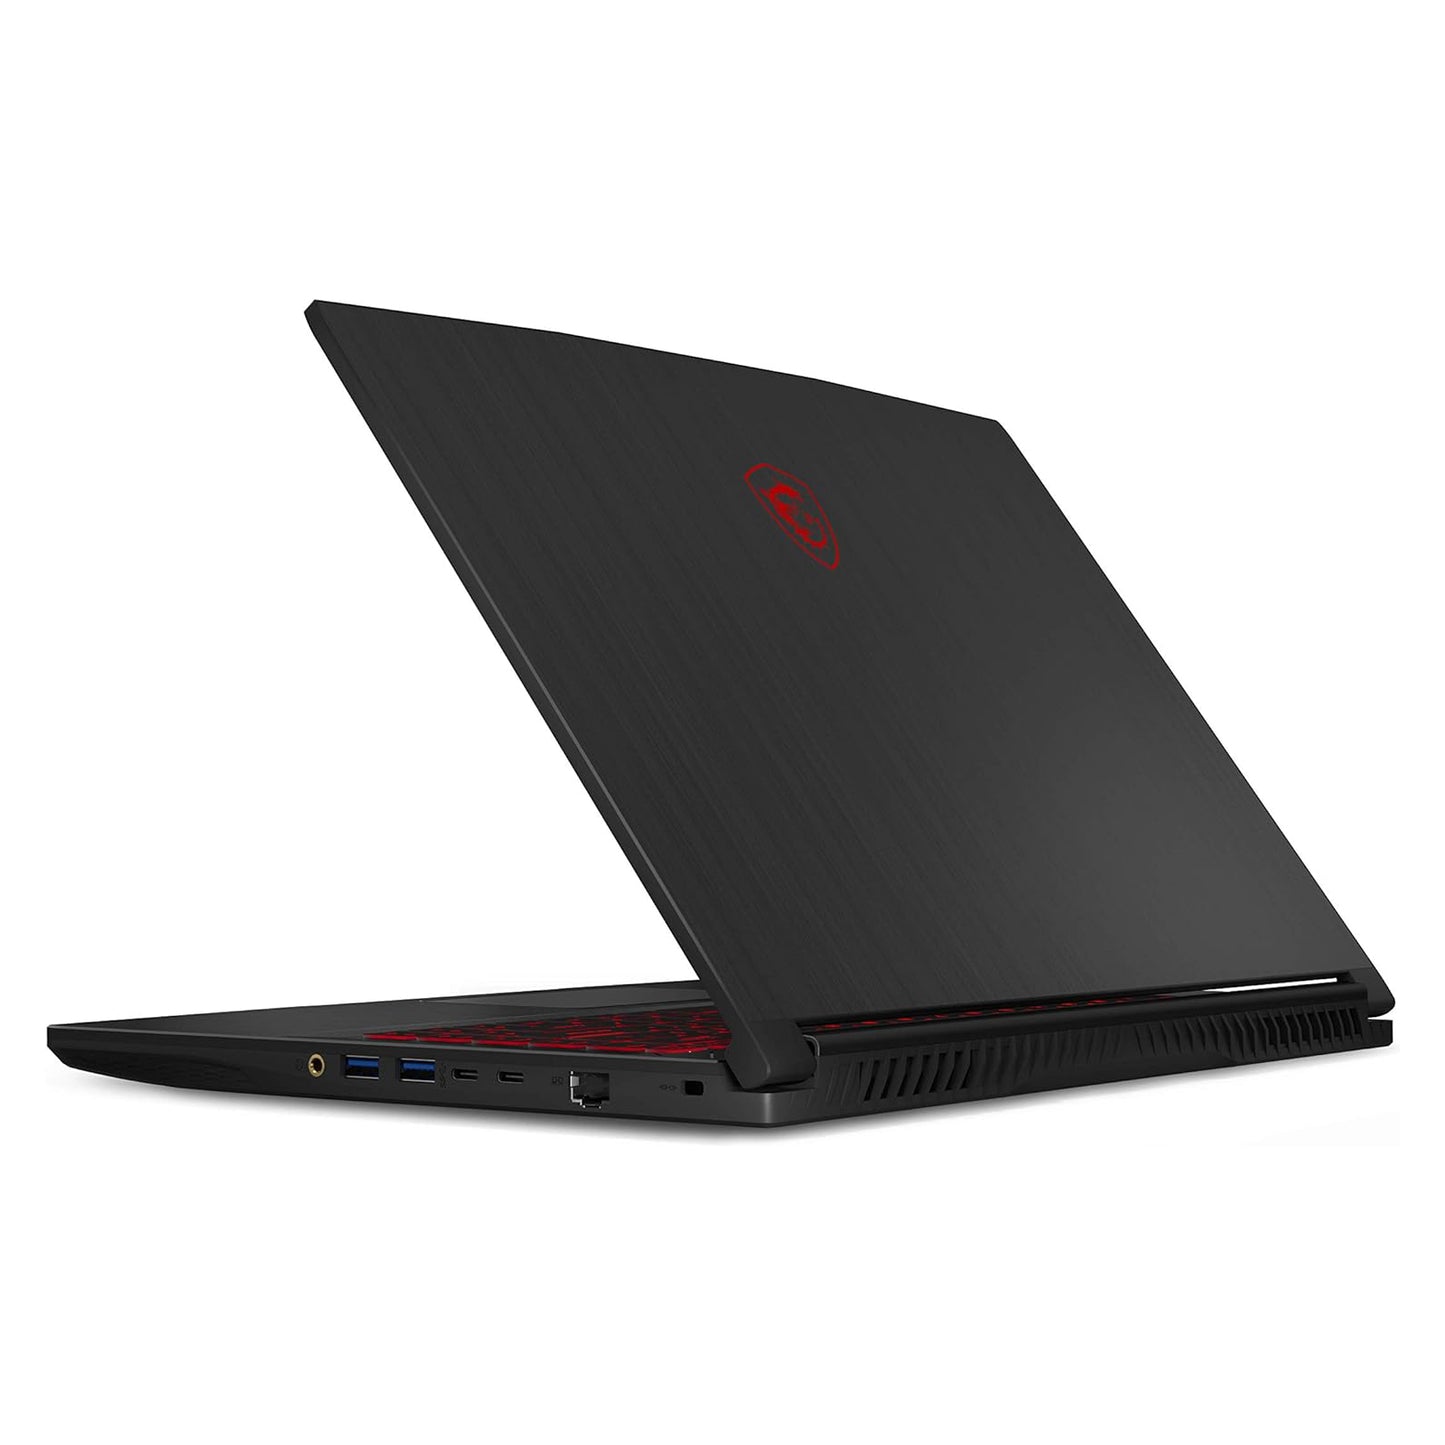 Msi GF65 Thin 9S7-16W212-270-R Core i7-10750h Rtx 3060 144hz Gaming Laptop Offers (New OB)